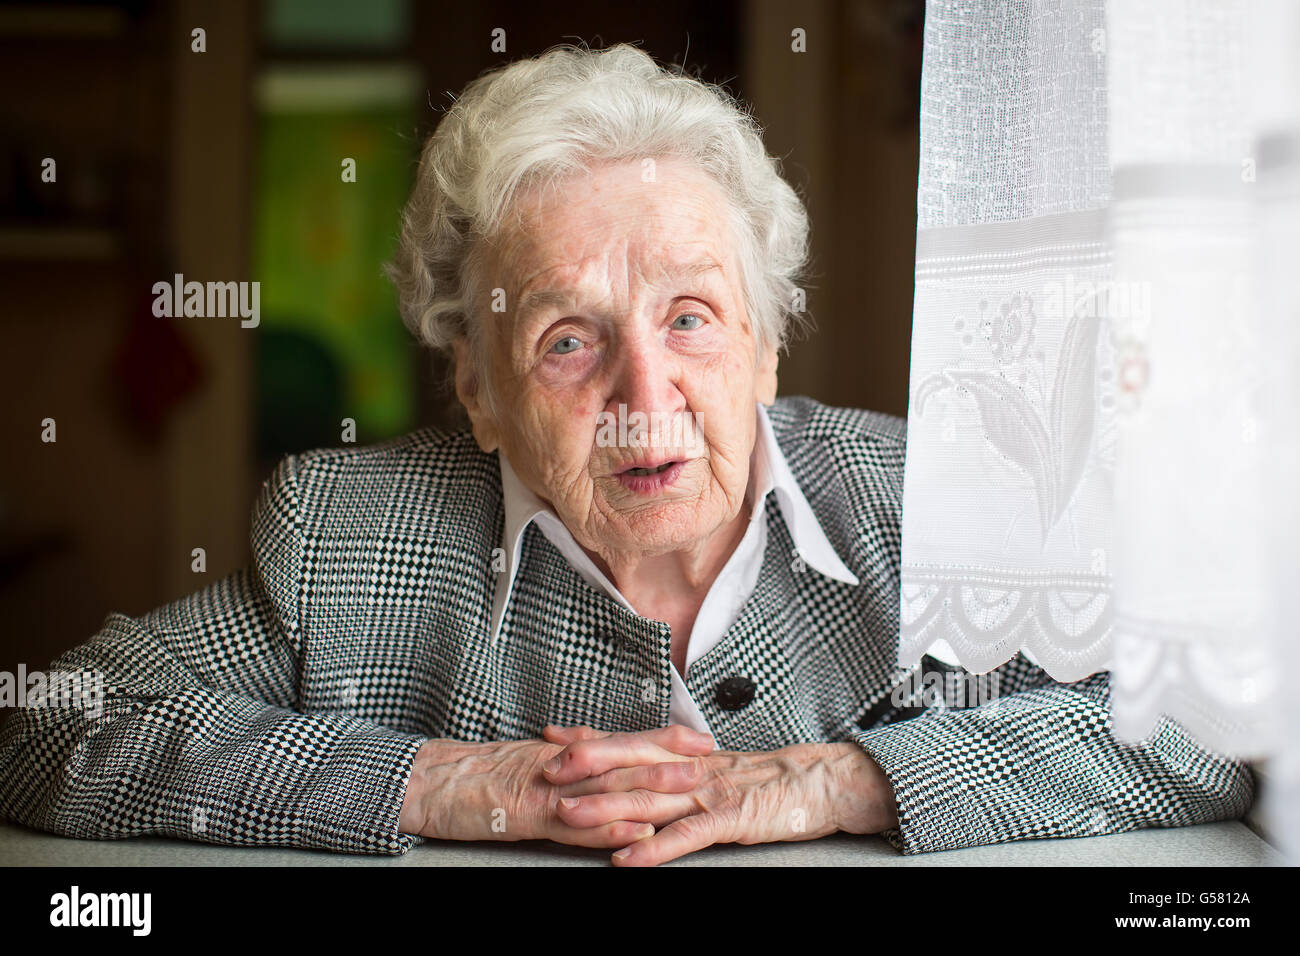 Portrait of an elderly woman sitting at the table. Stock Photo